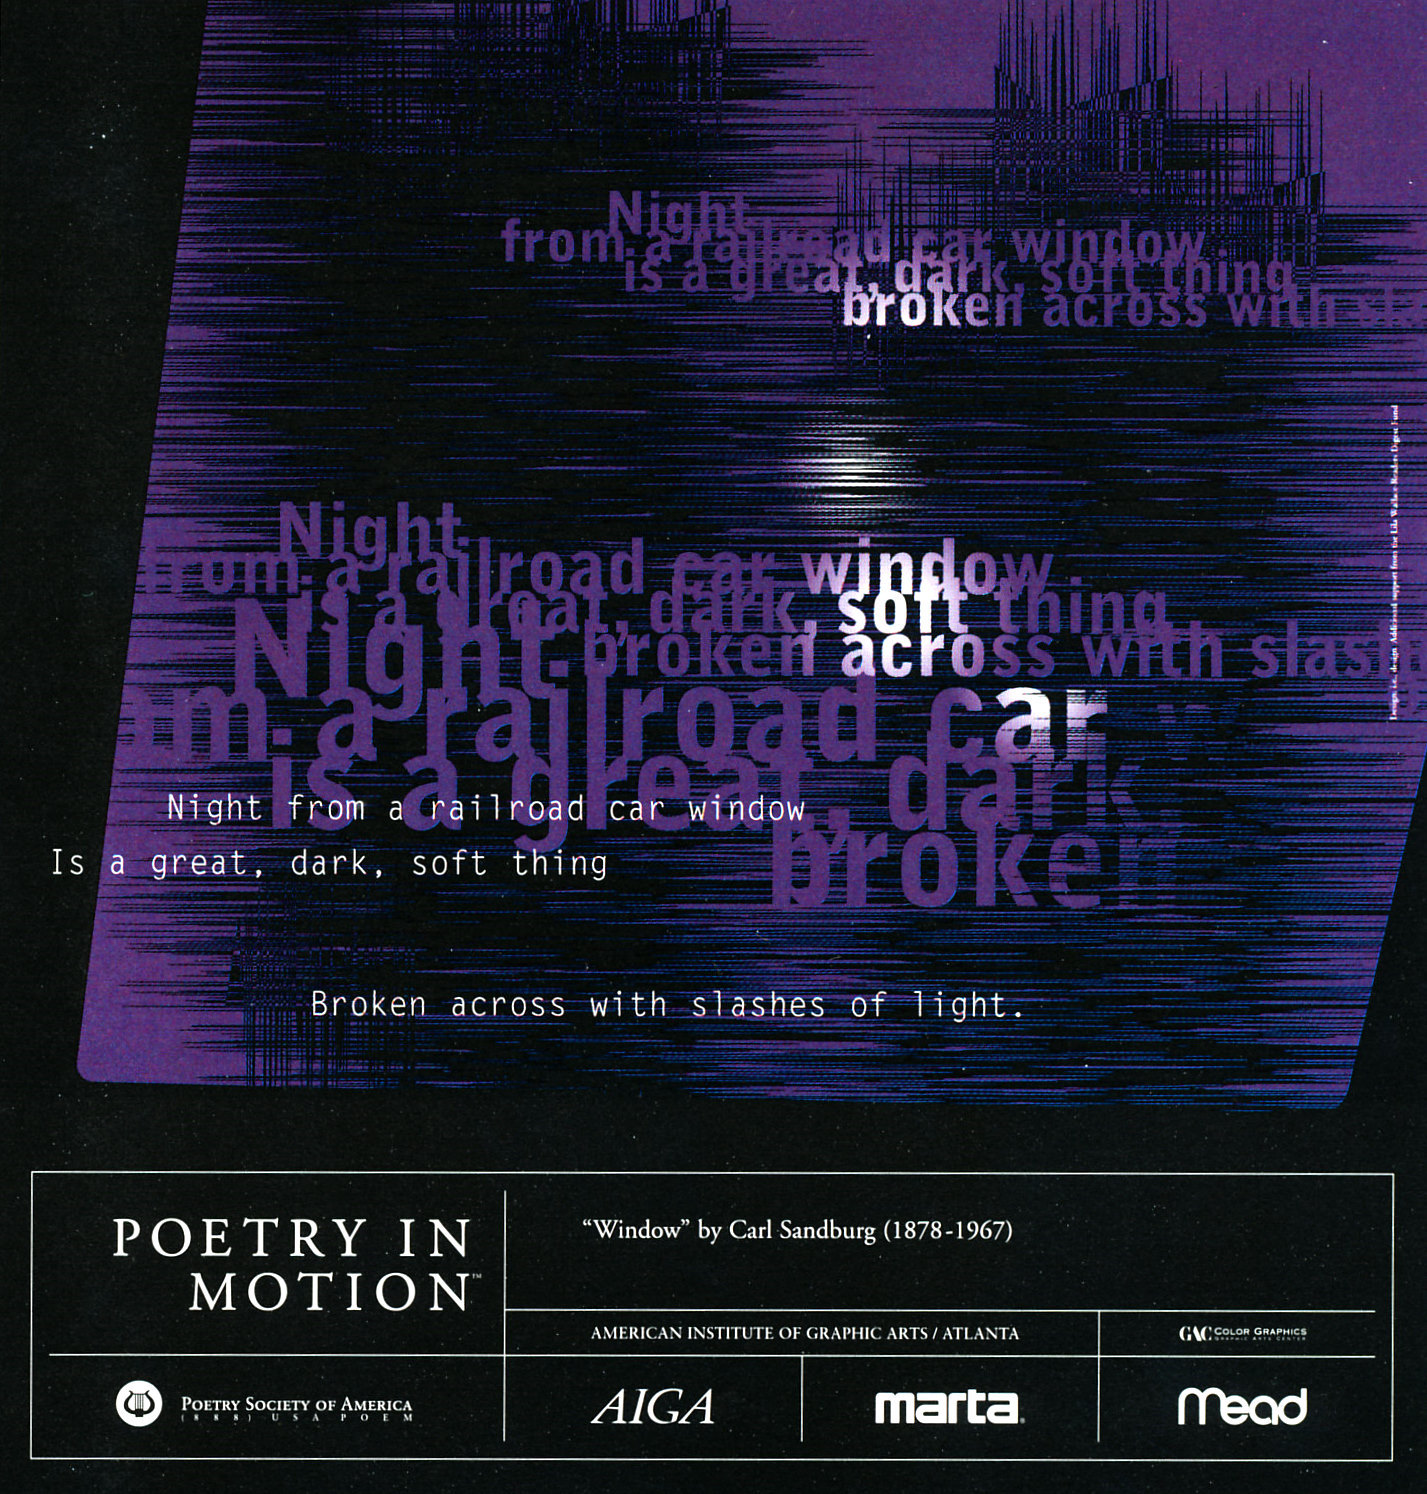 A black and purple poster features the poem Window by Carl Sandburg written in white text.